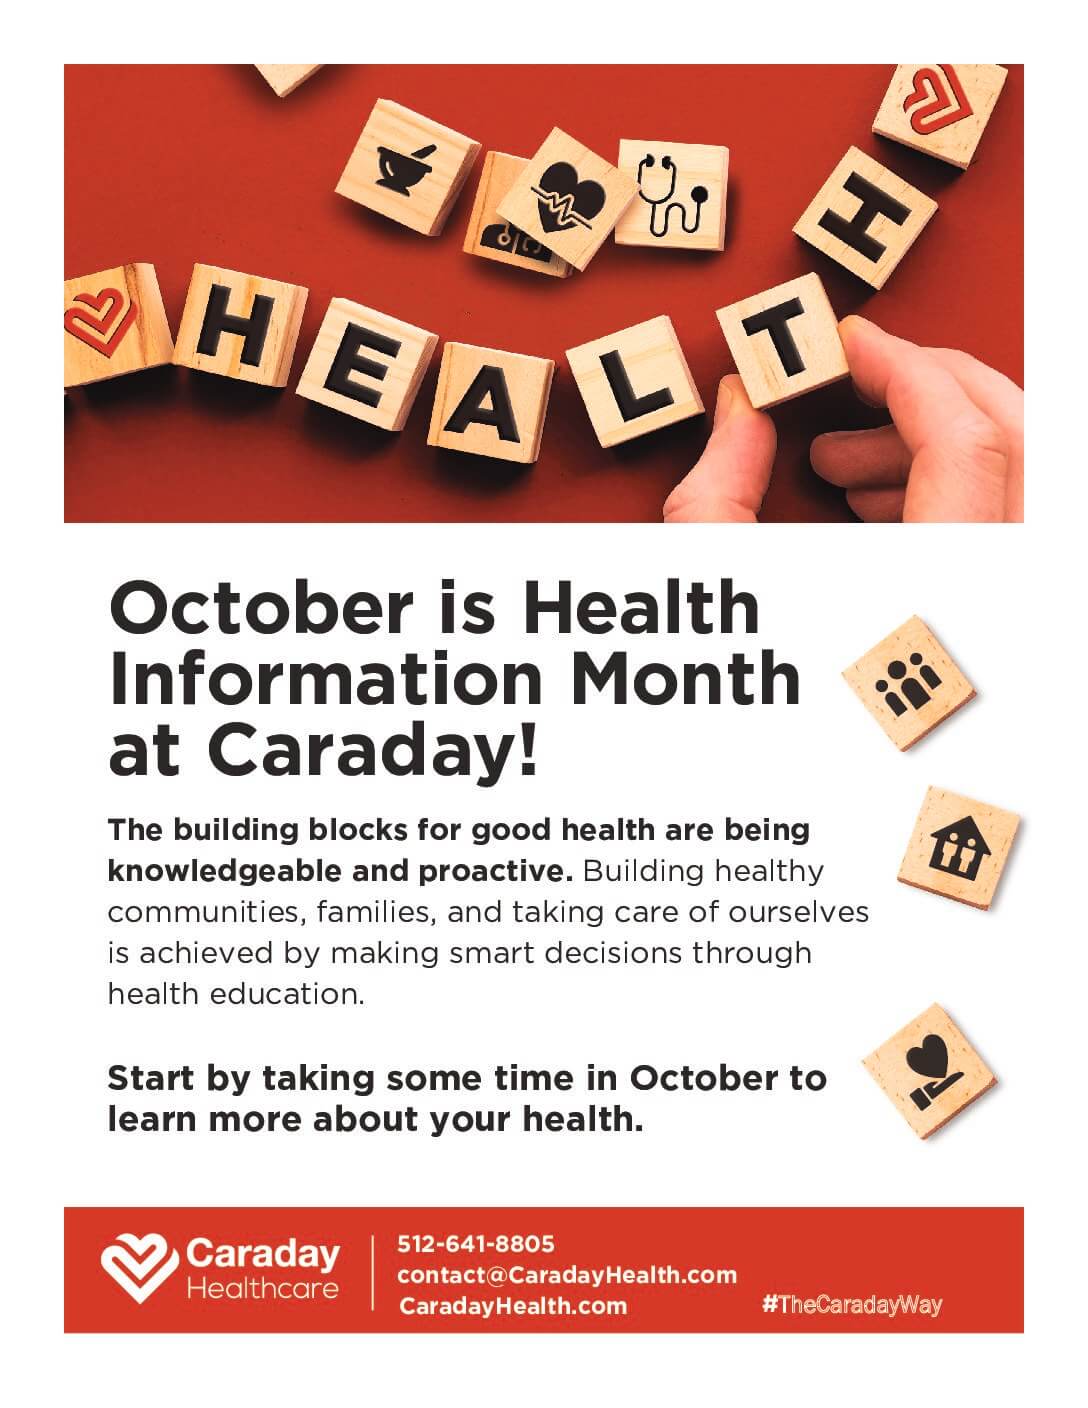 October is Health Information Month at Caraday